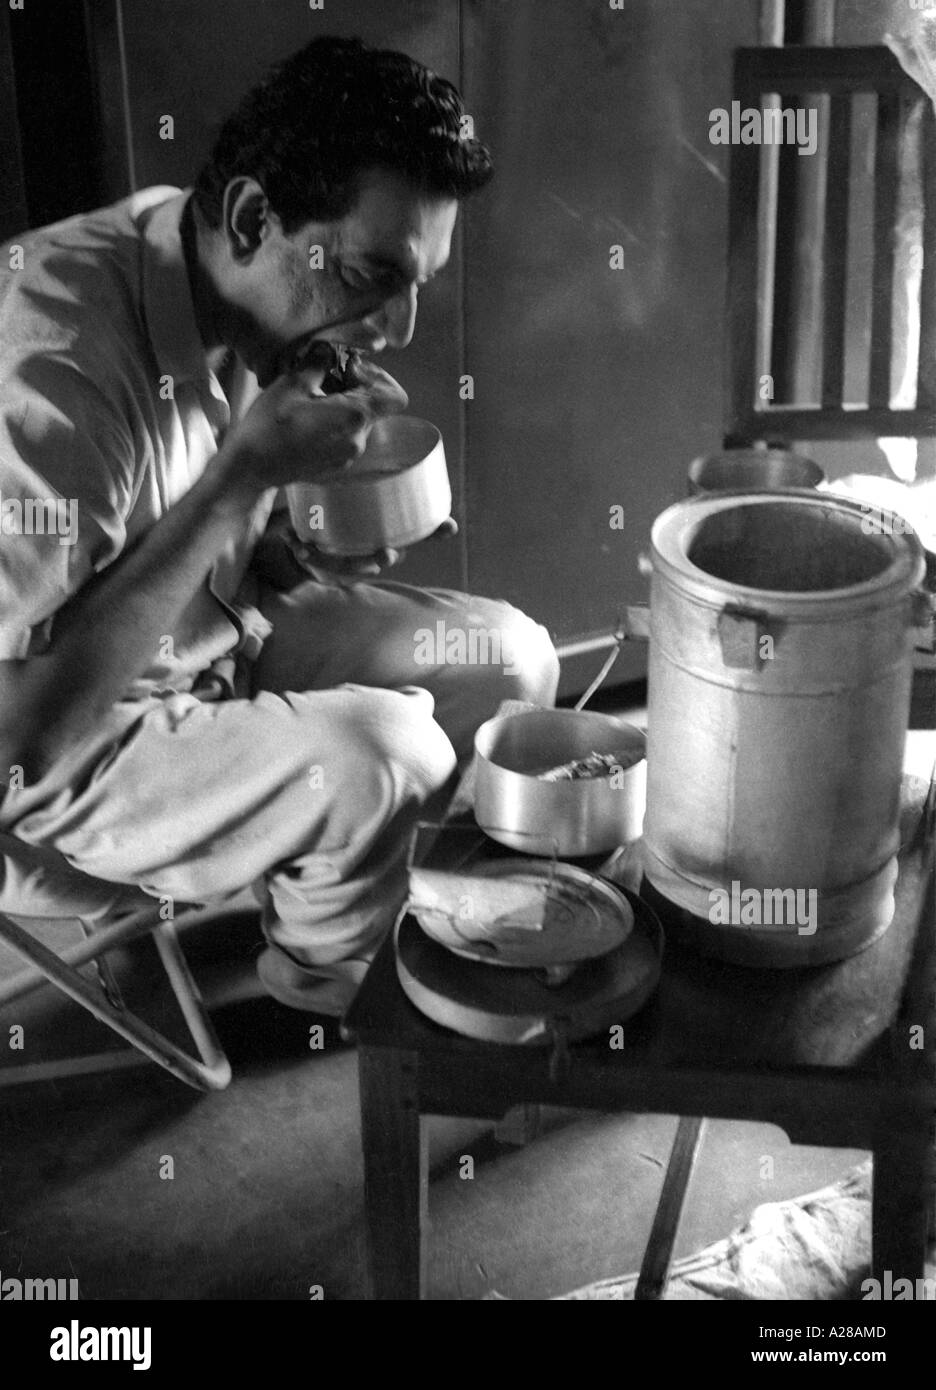 Satyajit Ray, Indian filmmaker, eating lunch while shooting Mahanagar, Calcutta, Kolkata, West Bengal, India, Asia, old vintage 1900s picture Stock Photo